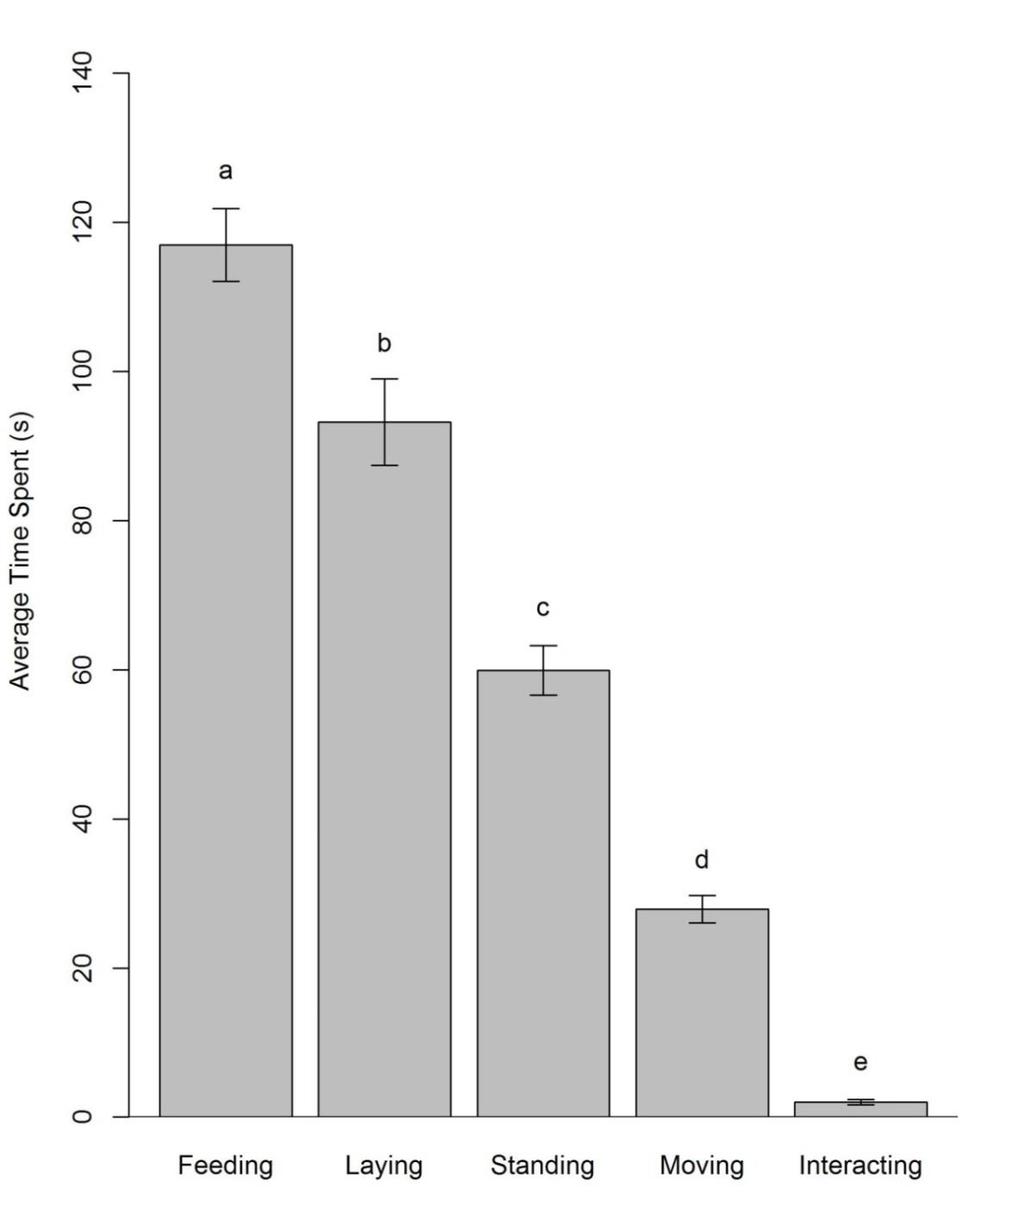 39 The amount of time bighorn sheep spent in the 5 observable behaviours were significantly different with the greatest amount of time spent feeding followed by laying, standing, moving, and